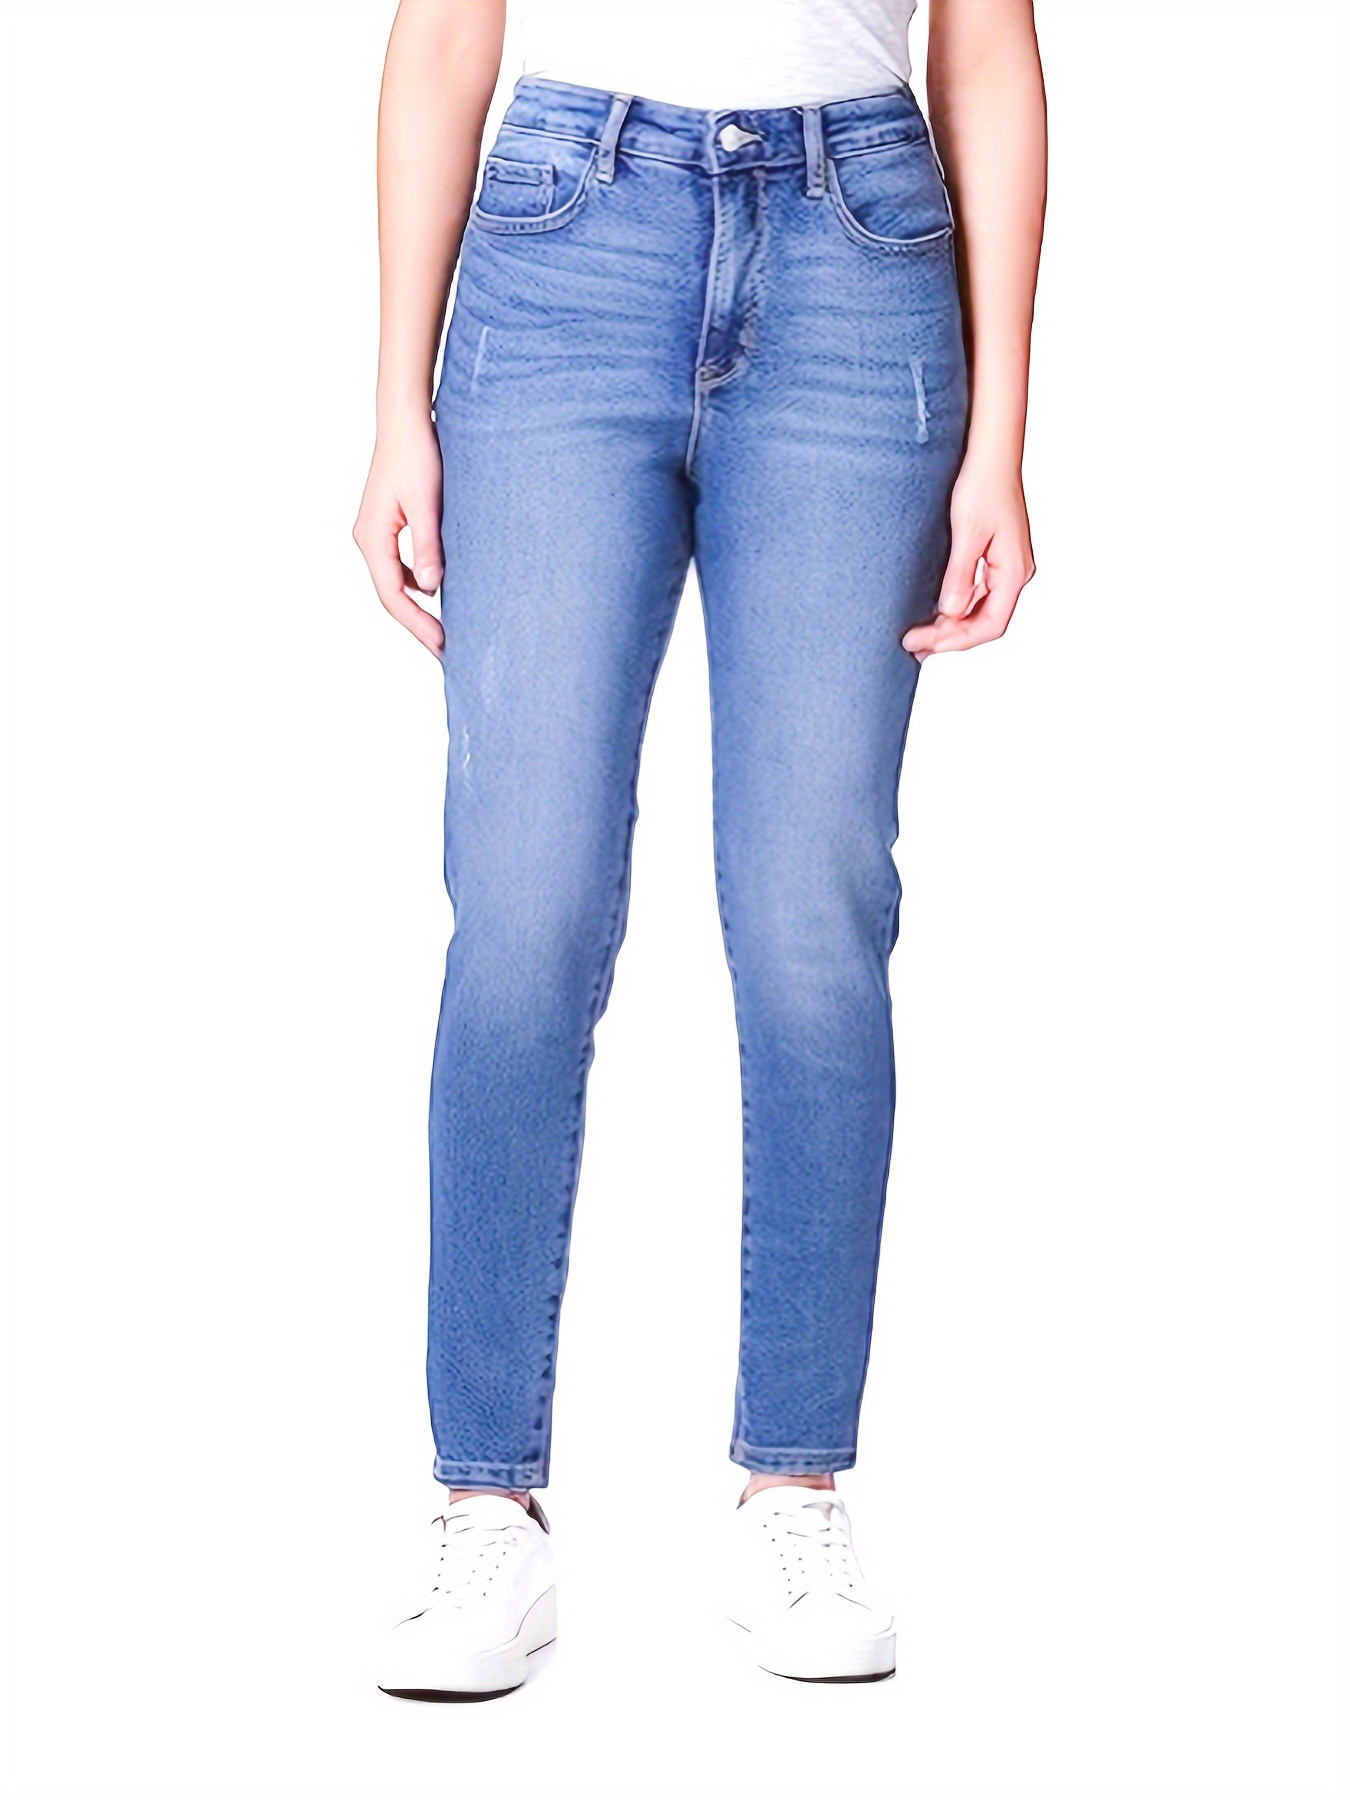 Women's High Waisted Jeans for Women Distressed Stretch Jeans for Women  Ripped Butt Lift Jeans Denim Pants Blue, Size 10 at  Women's Jeans  store